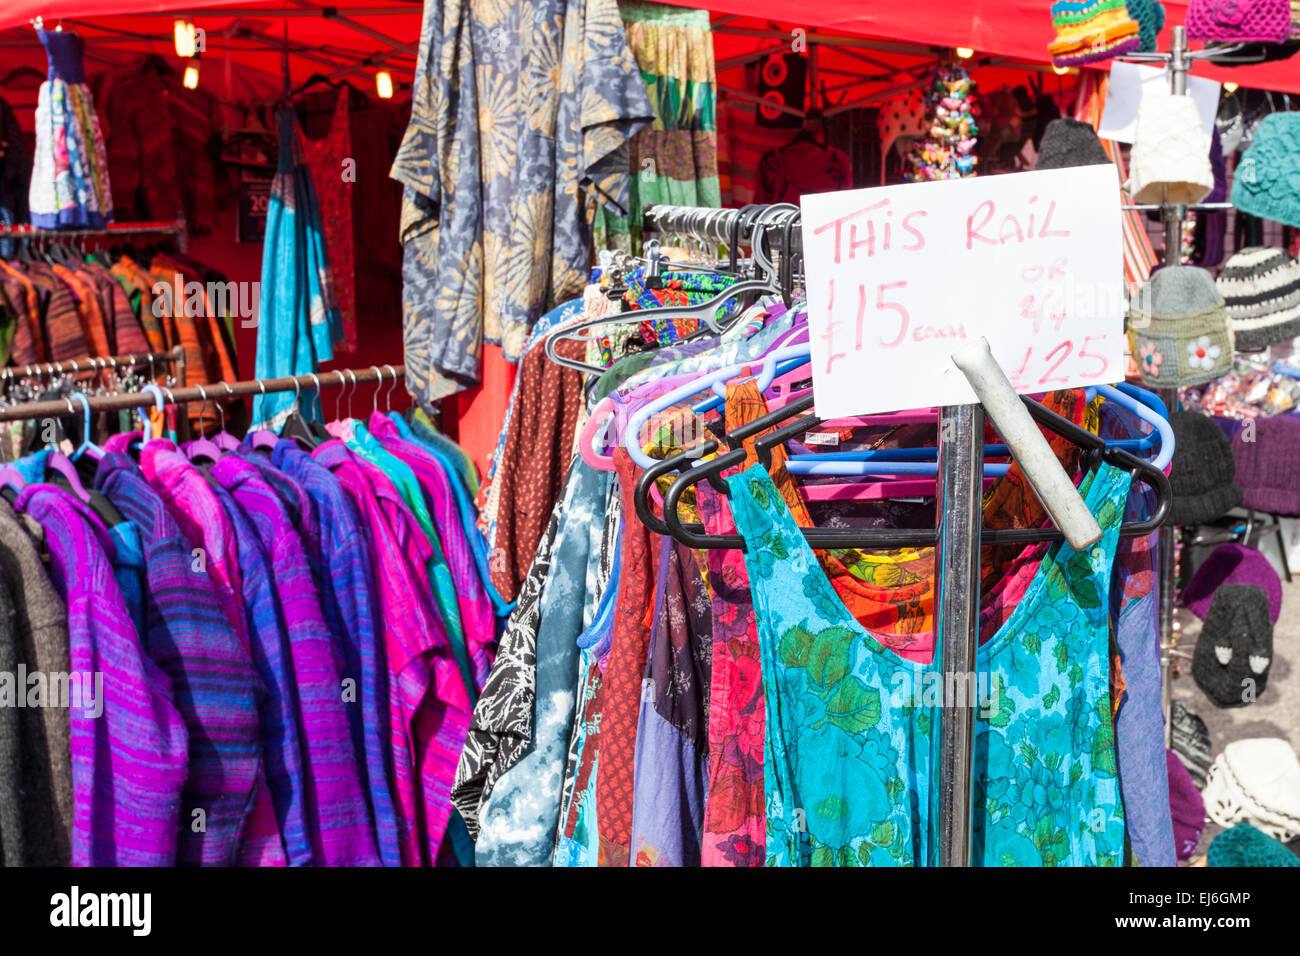 Dress rail with dresses for sale with a price ticket showing cheap prices for clothes on a clothing stall at a market, Nottingham, England, UK Stock Photo